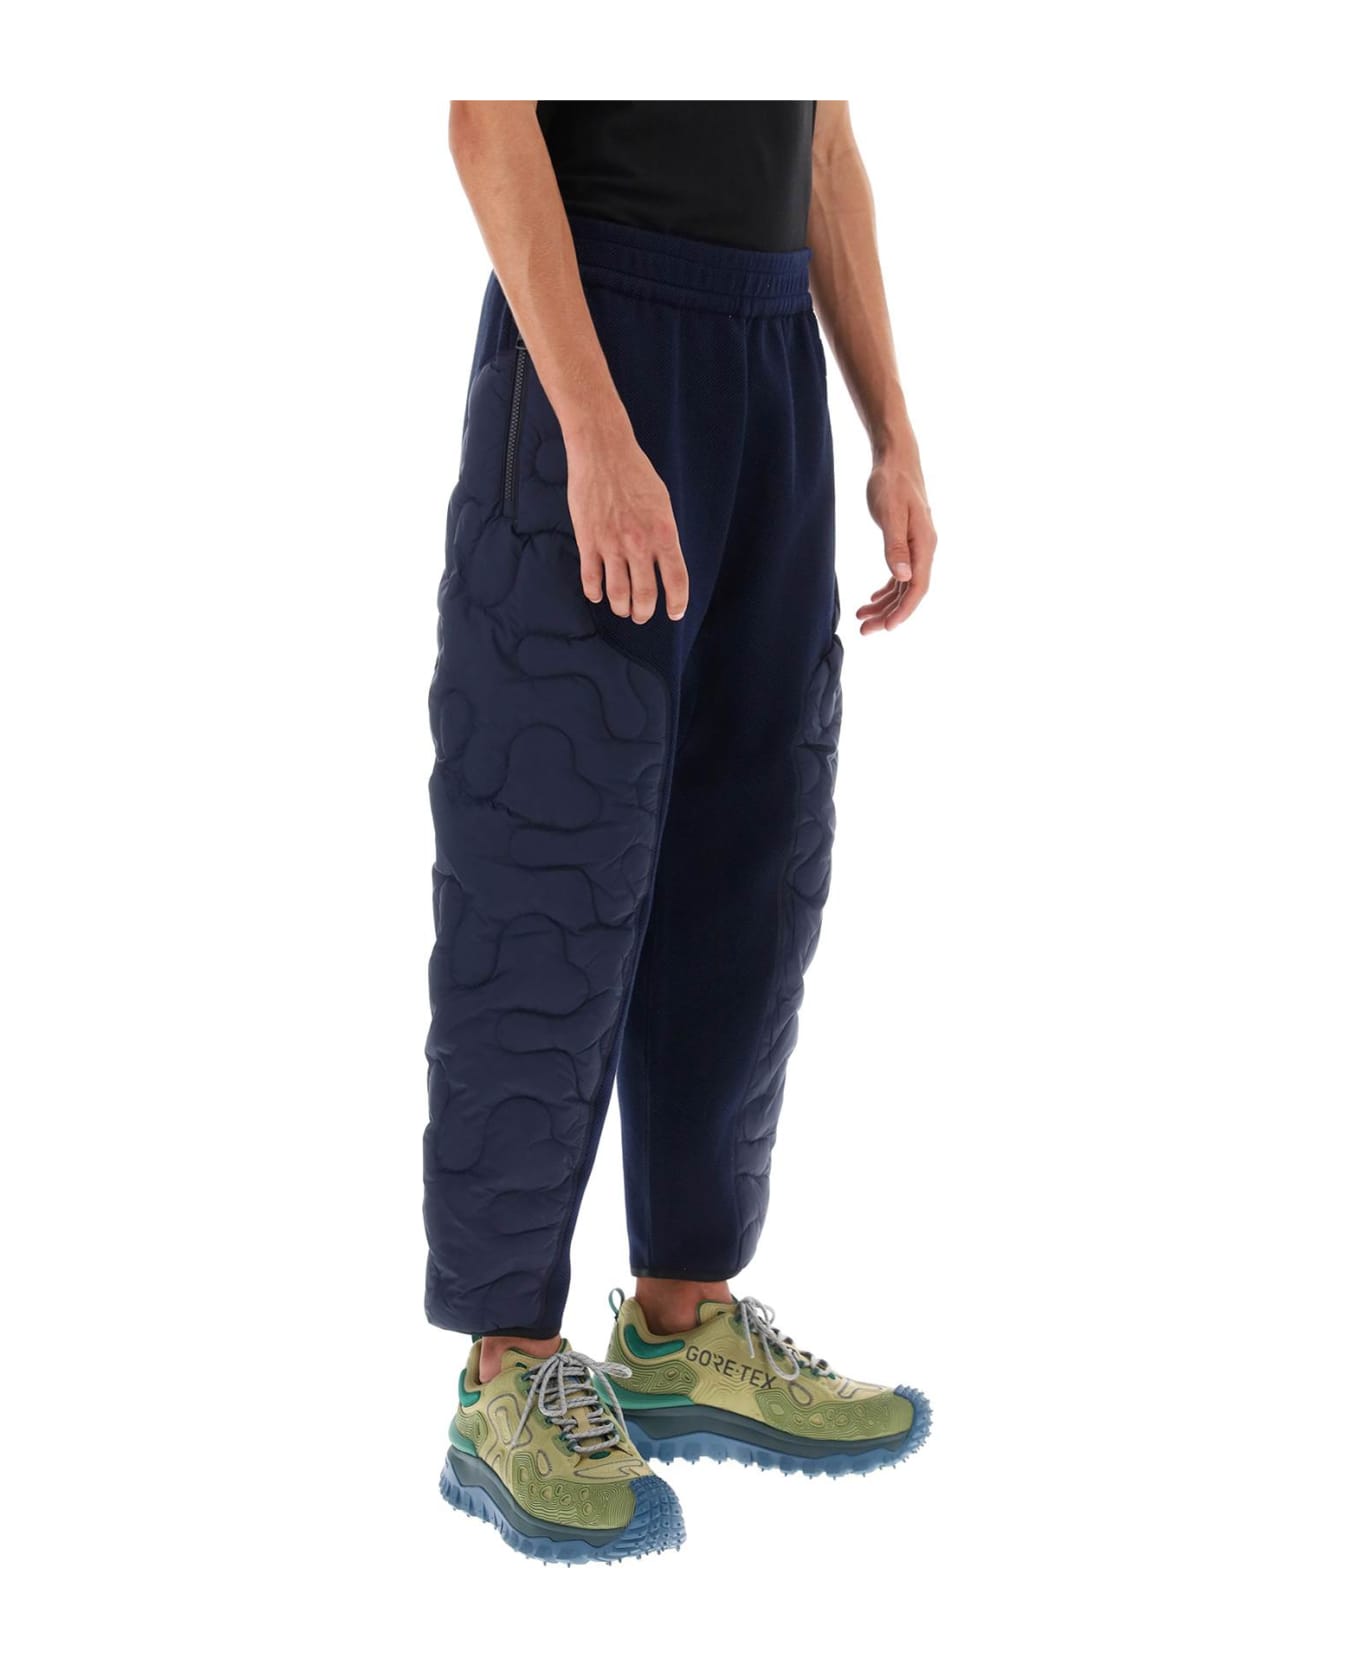 Moncler Genius Padded Trousers - Blue